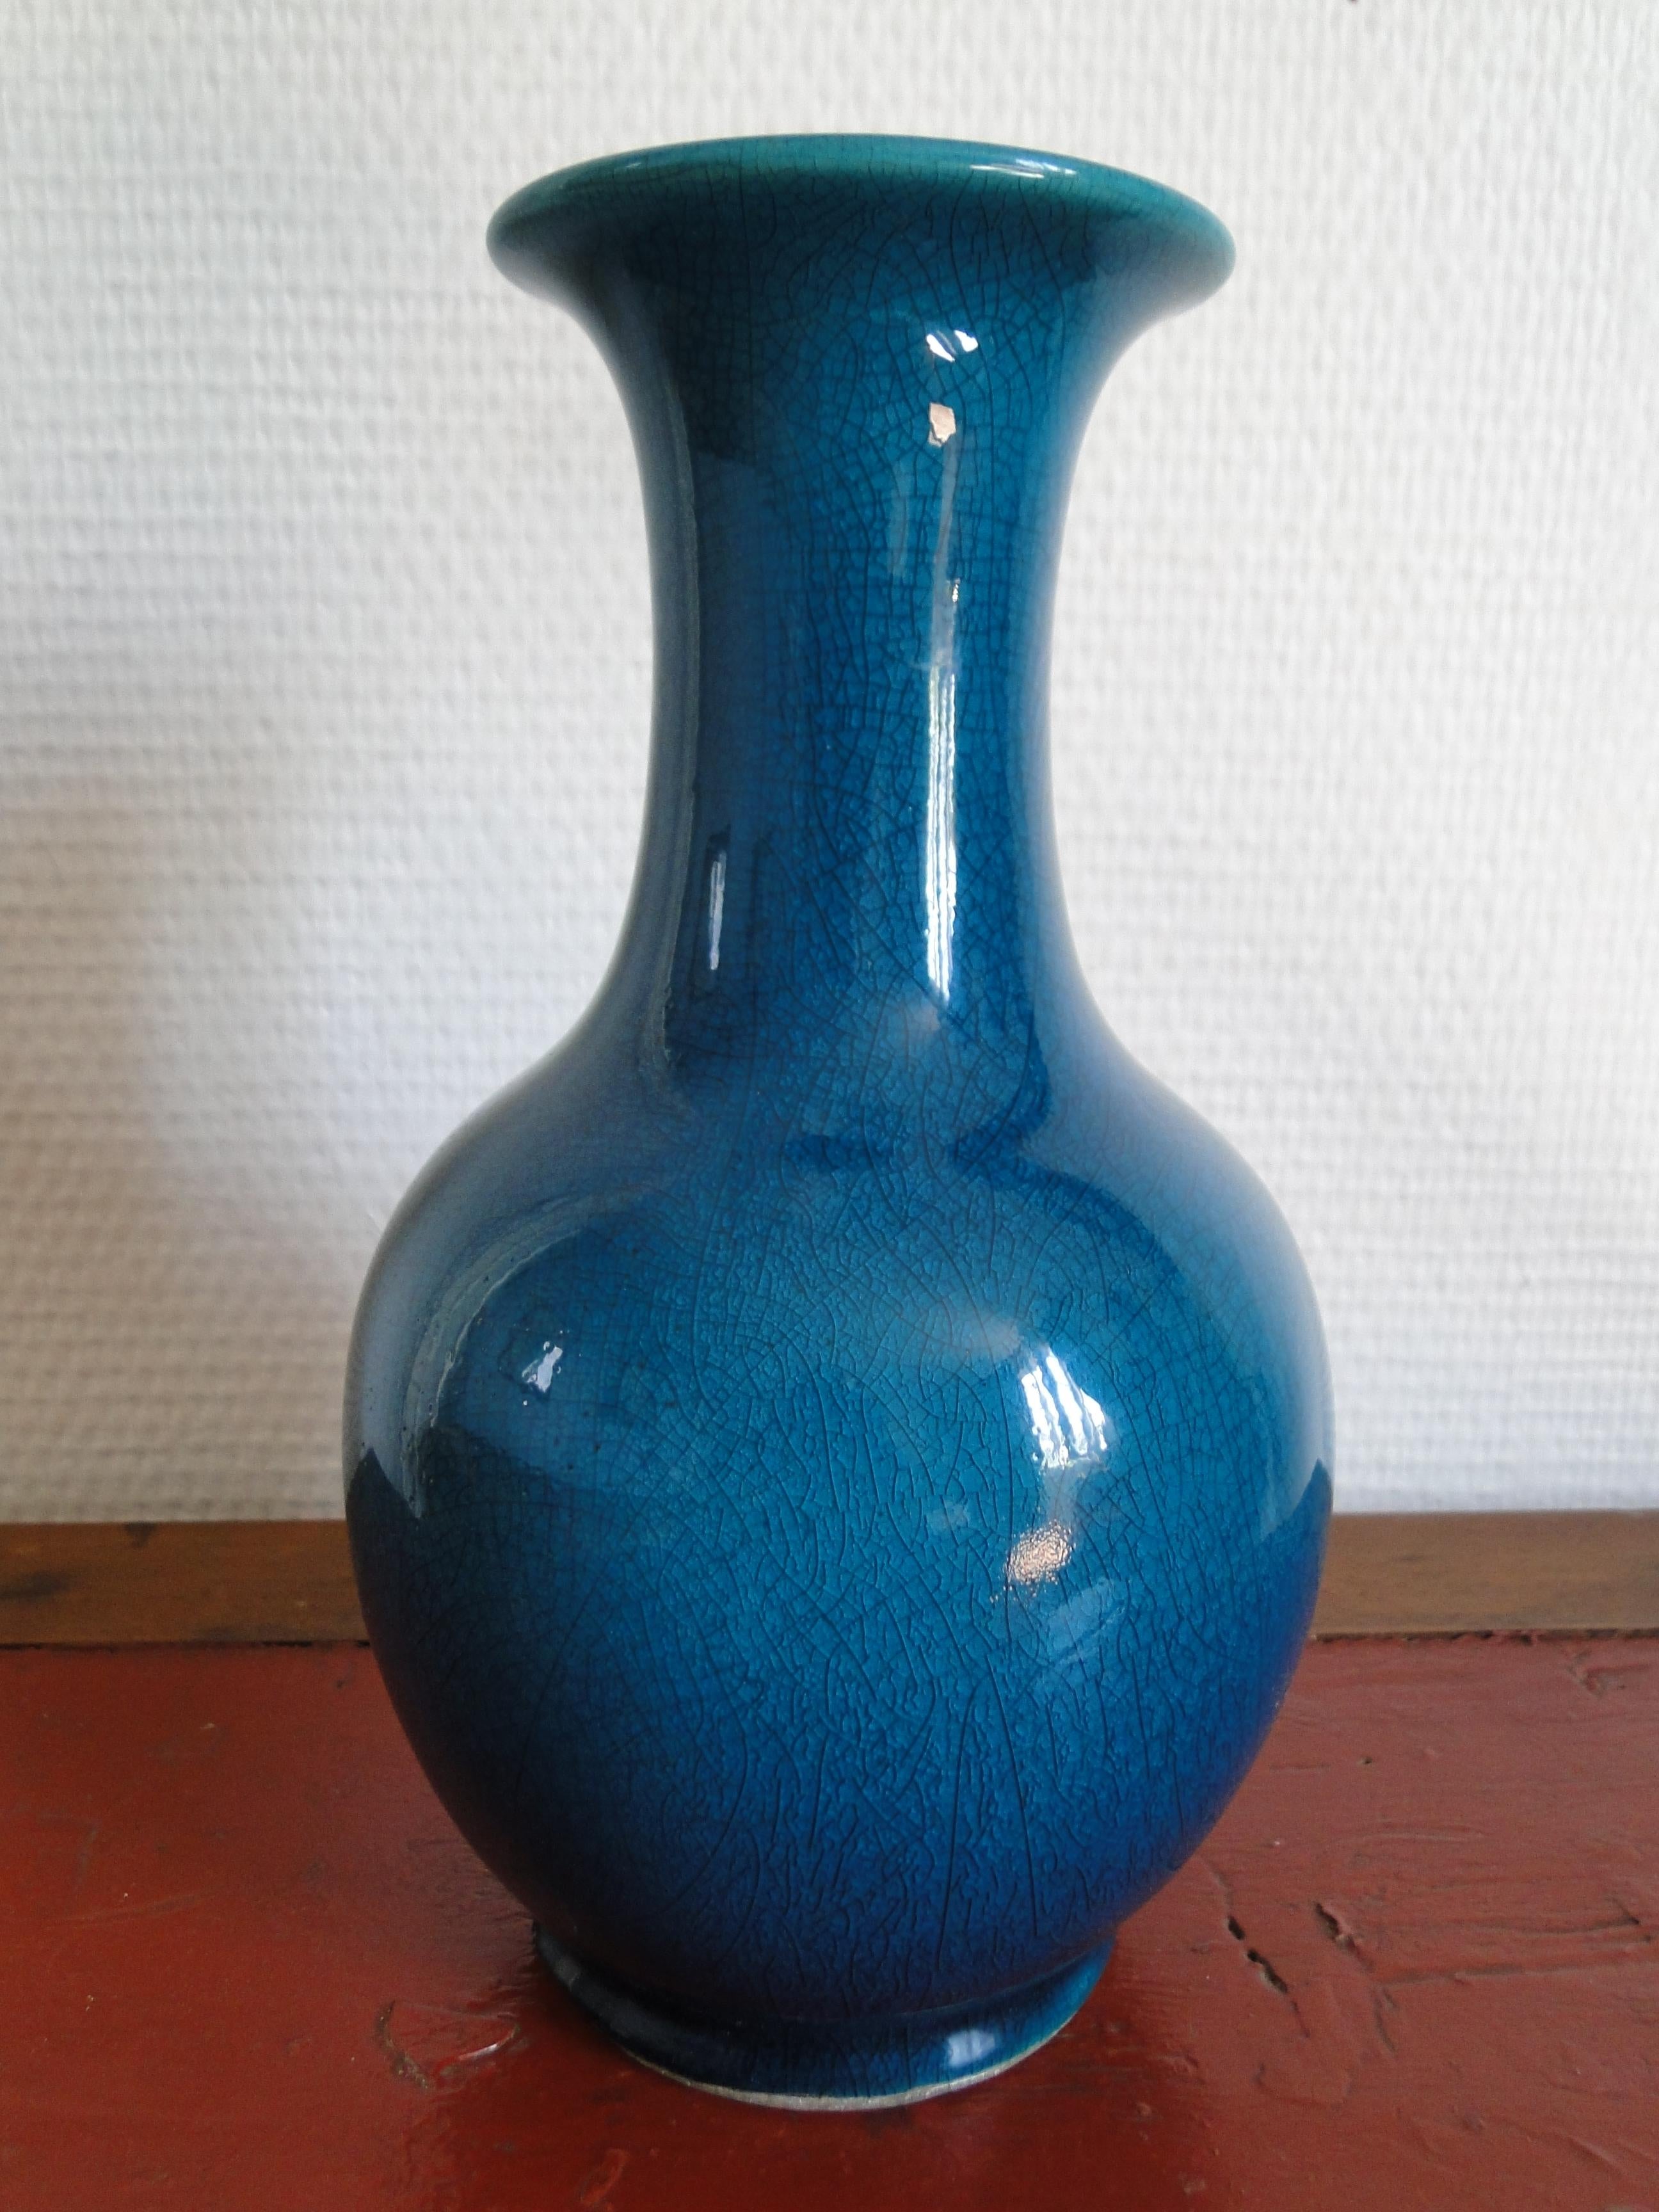 Pol Chambost

Made in France, original blue midcentury ceramic vase by the french artist.
Dated and signed under the vase.
Very good condition.